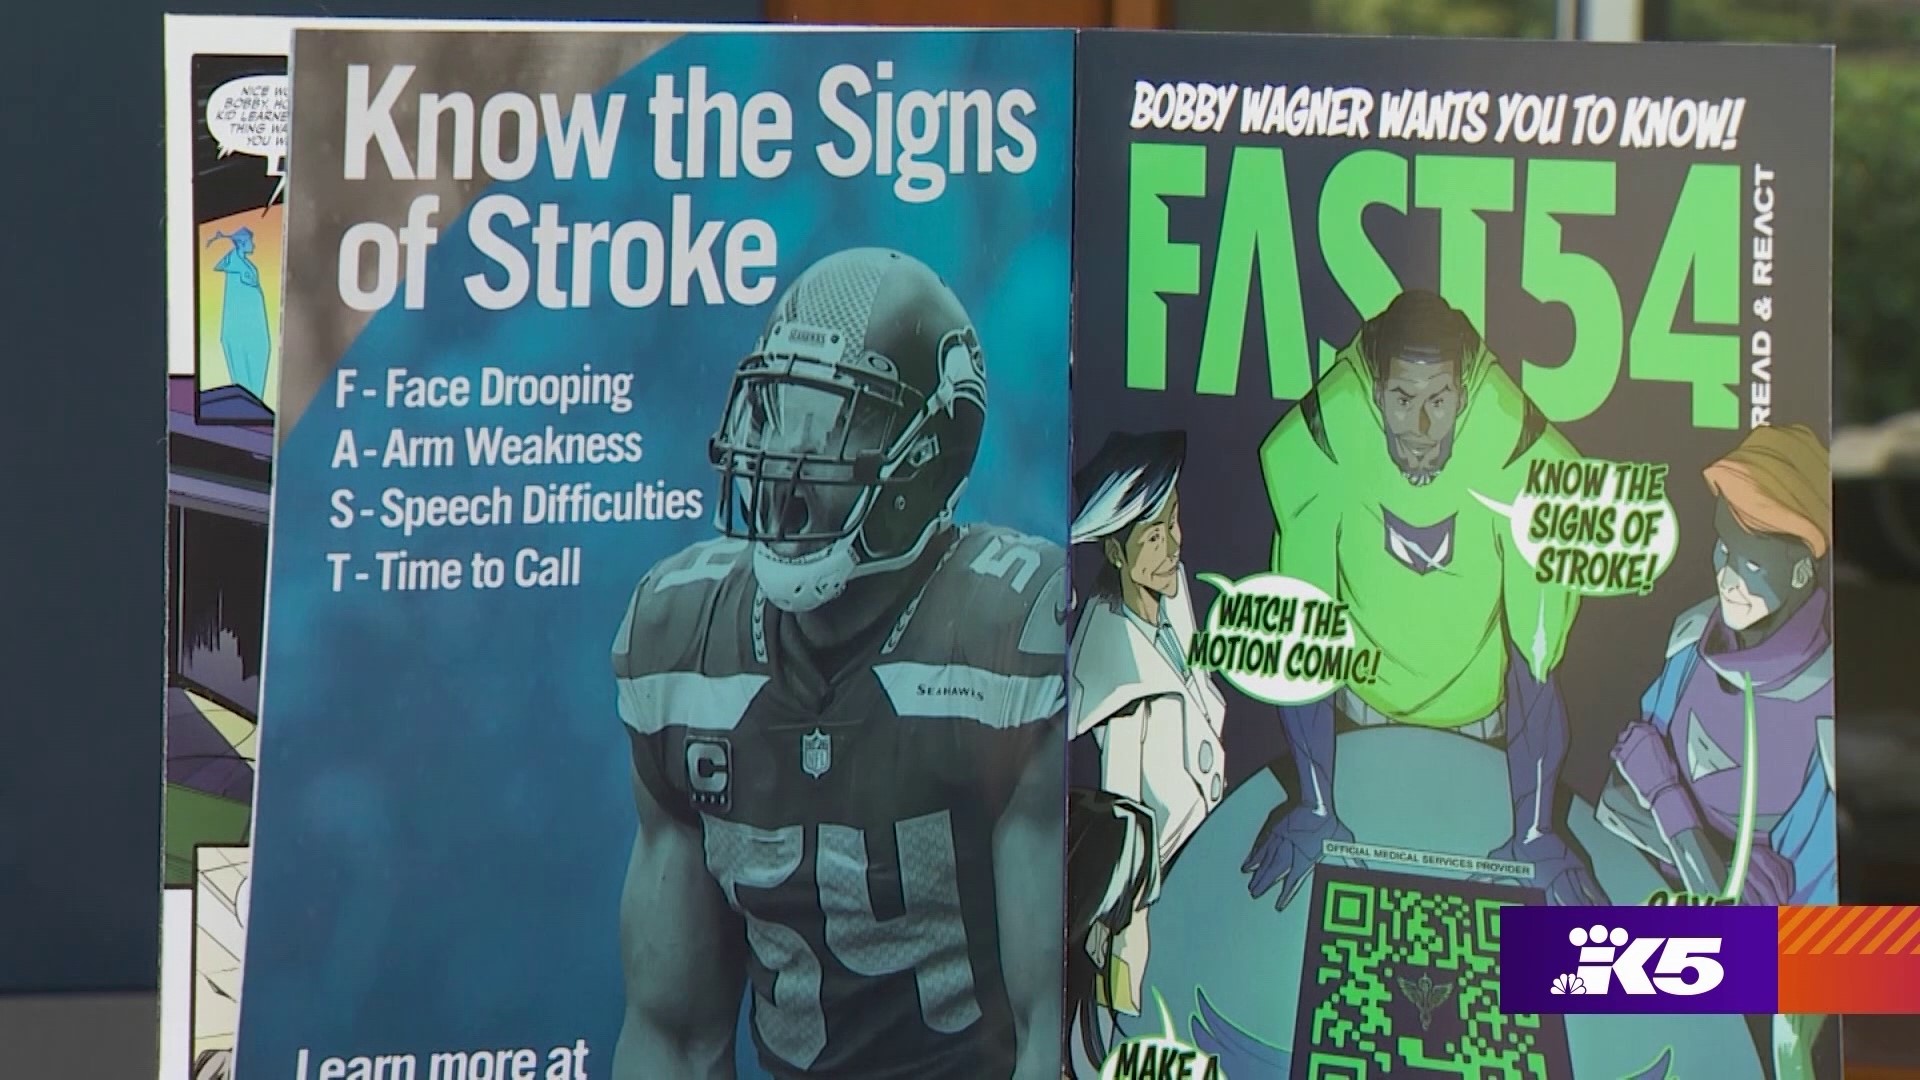 Wagner's "Fast 54" educates readers how to identify the signs and symptoms of a stroke.